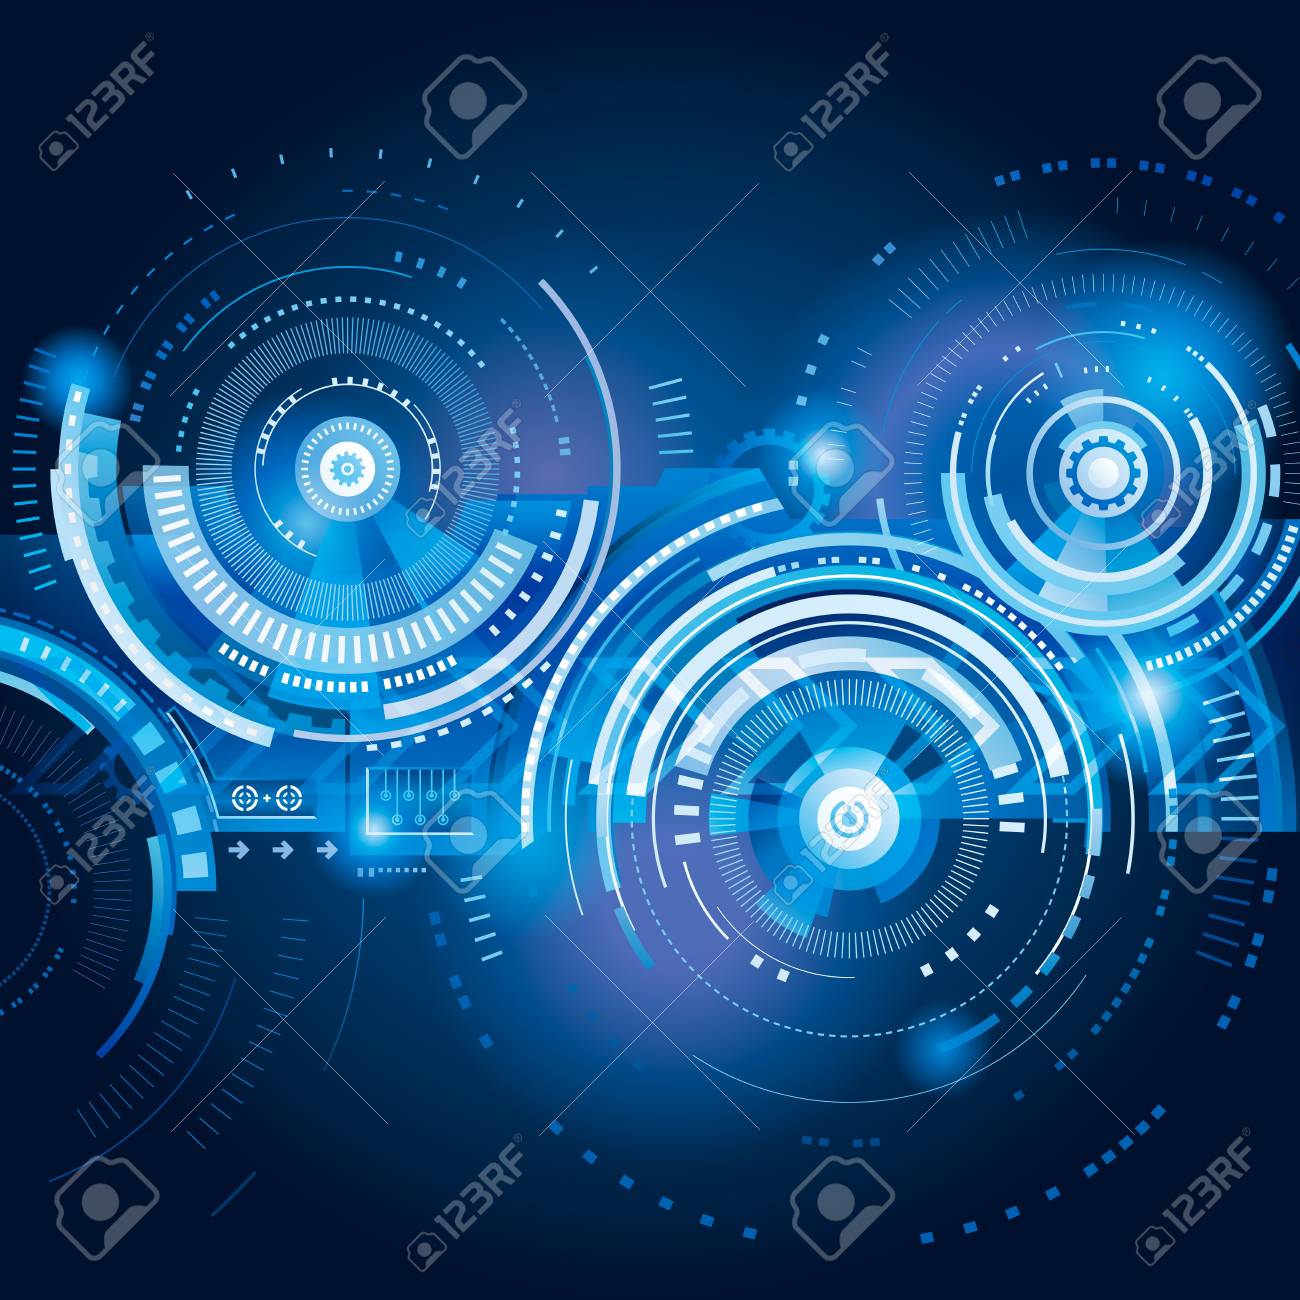 Abstract Technology Engineering Blue Technical Background Royalty